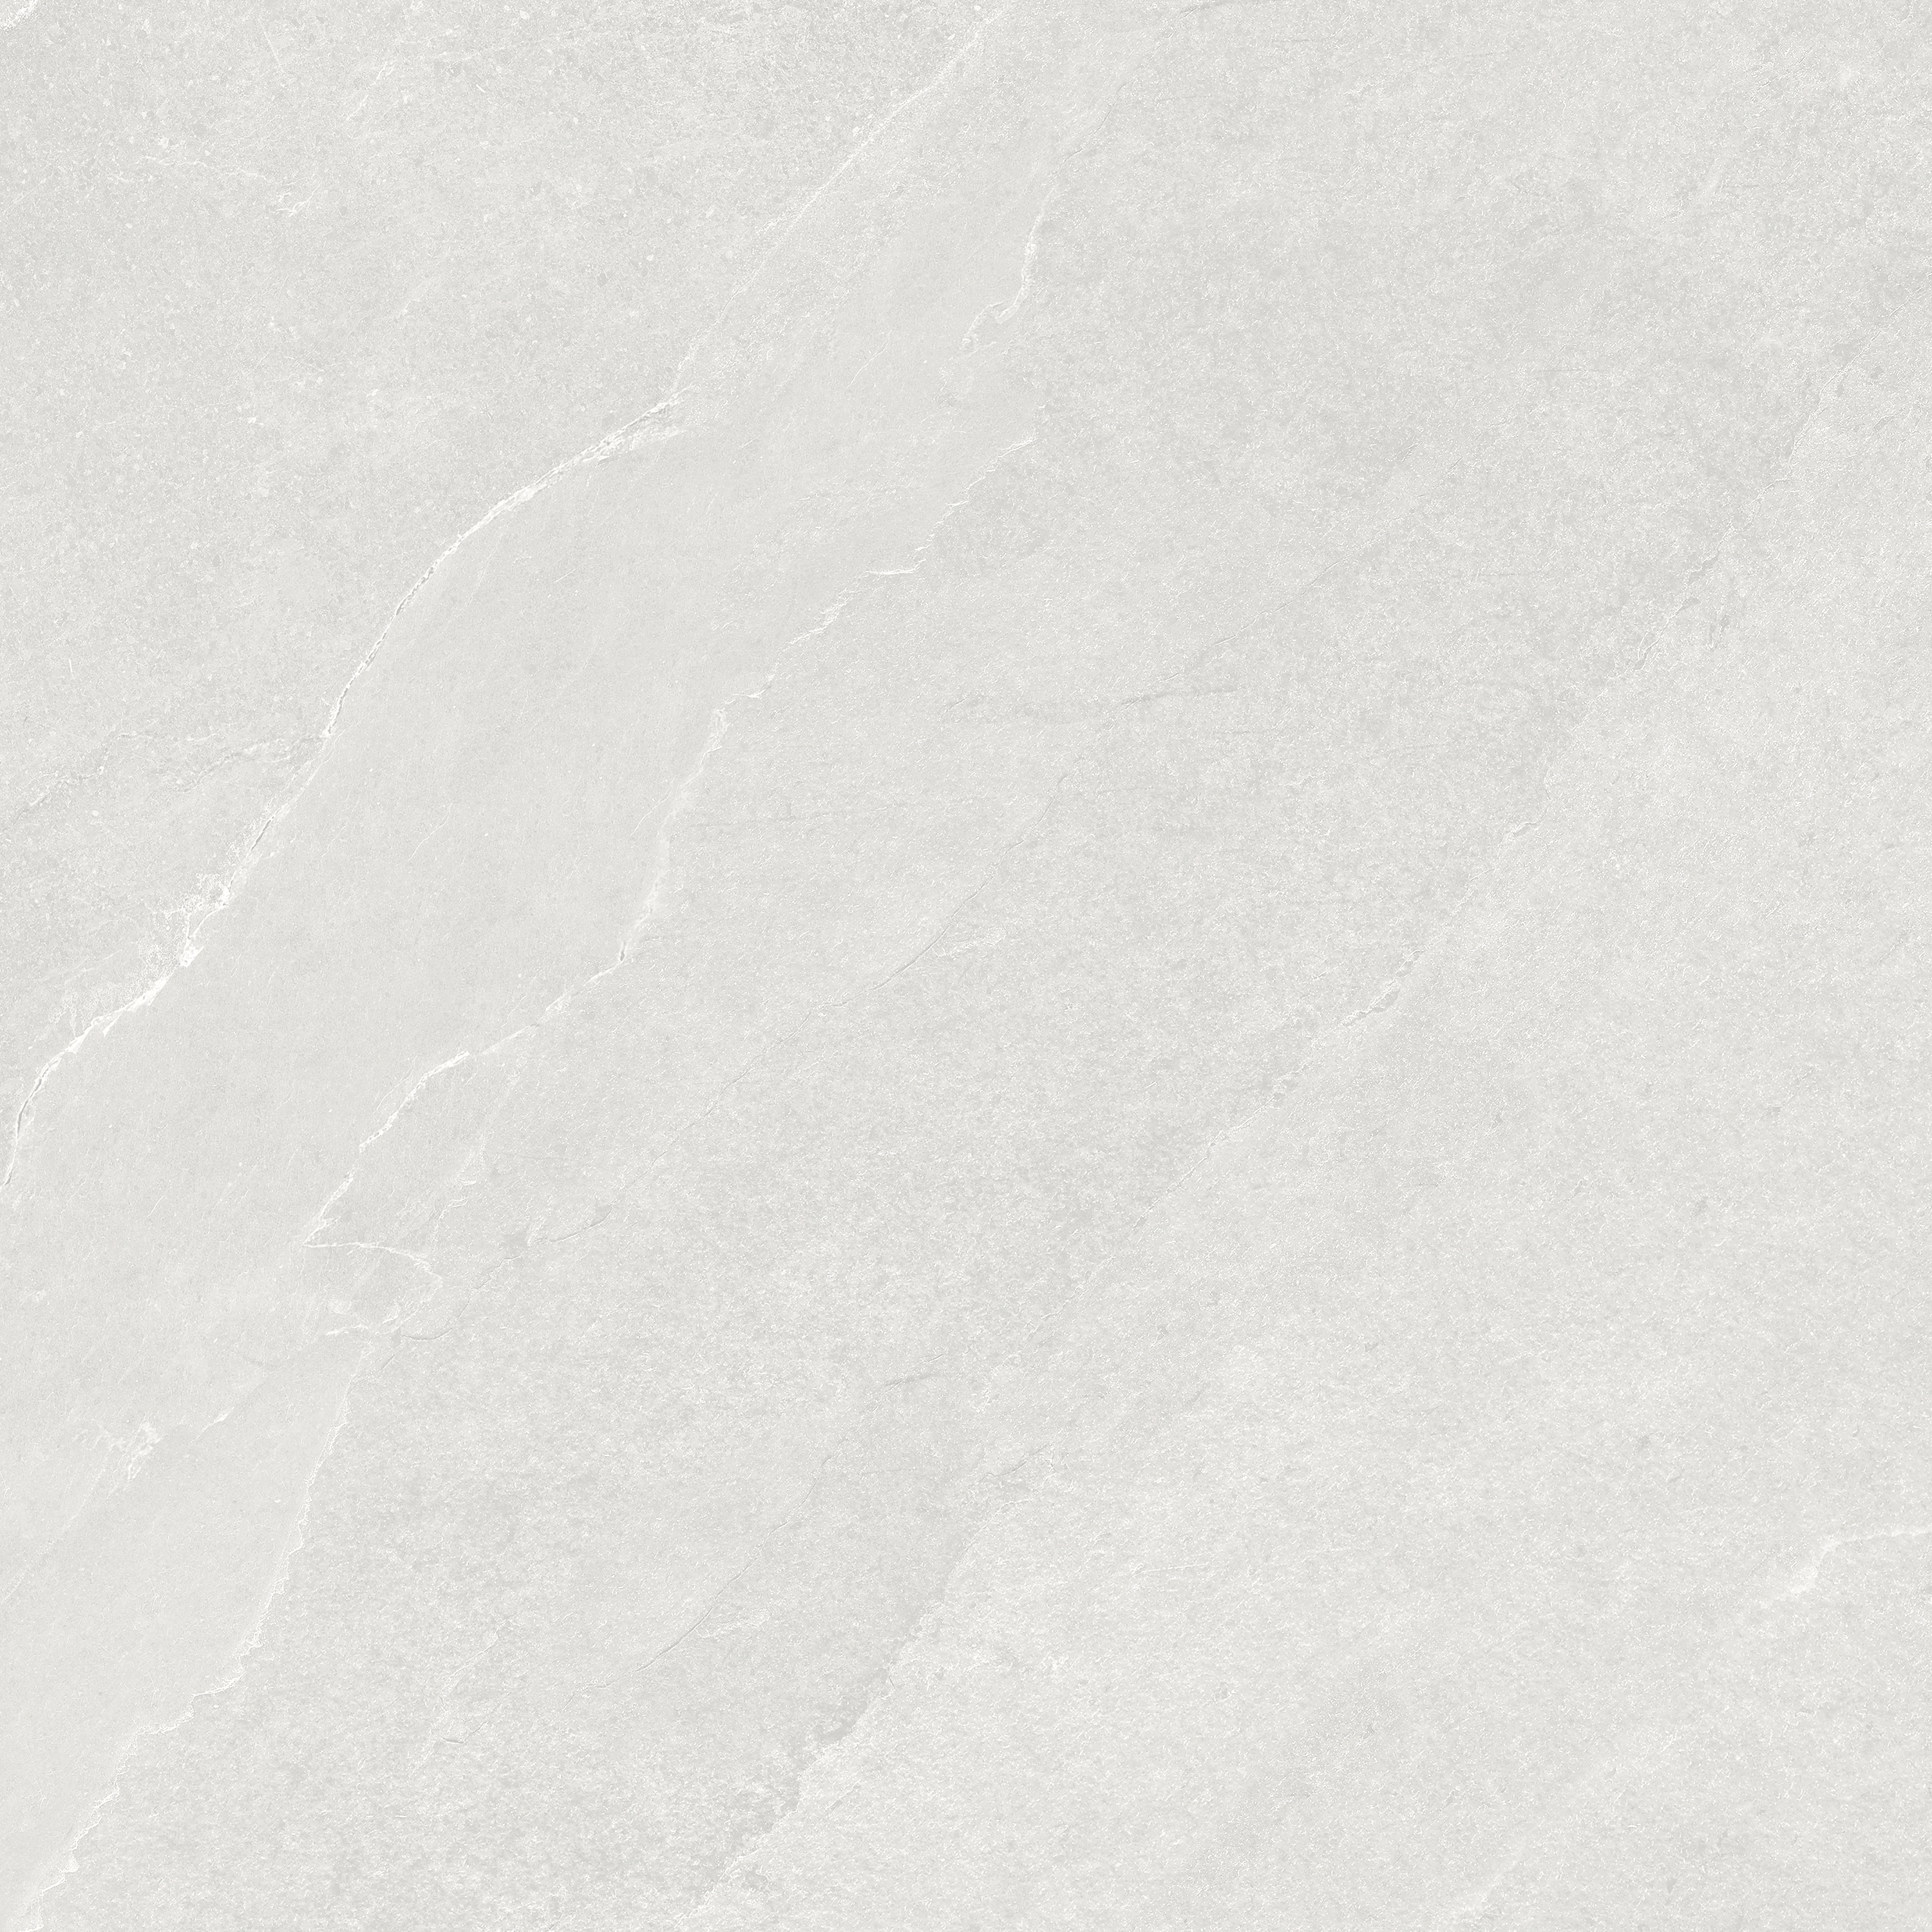 lithium pattern color body porcelain field tile from nord anatolia collection distributed by surface group international matte finish rectified edge 24x24 square shape